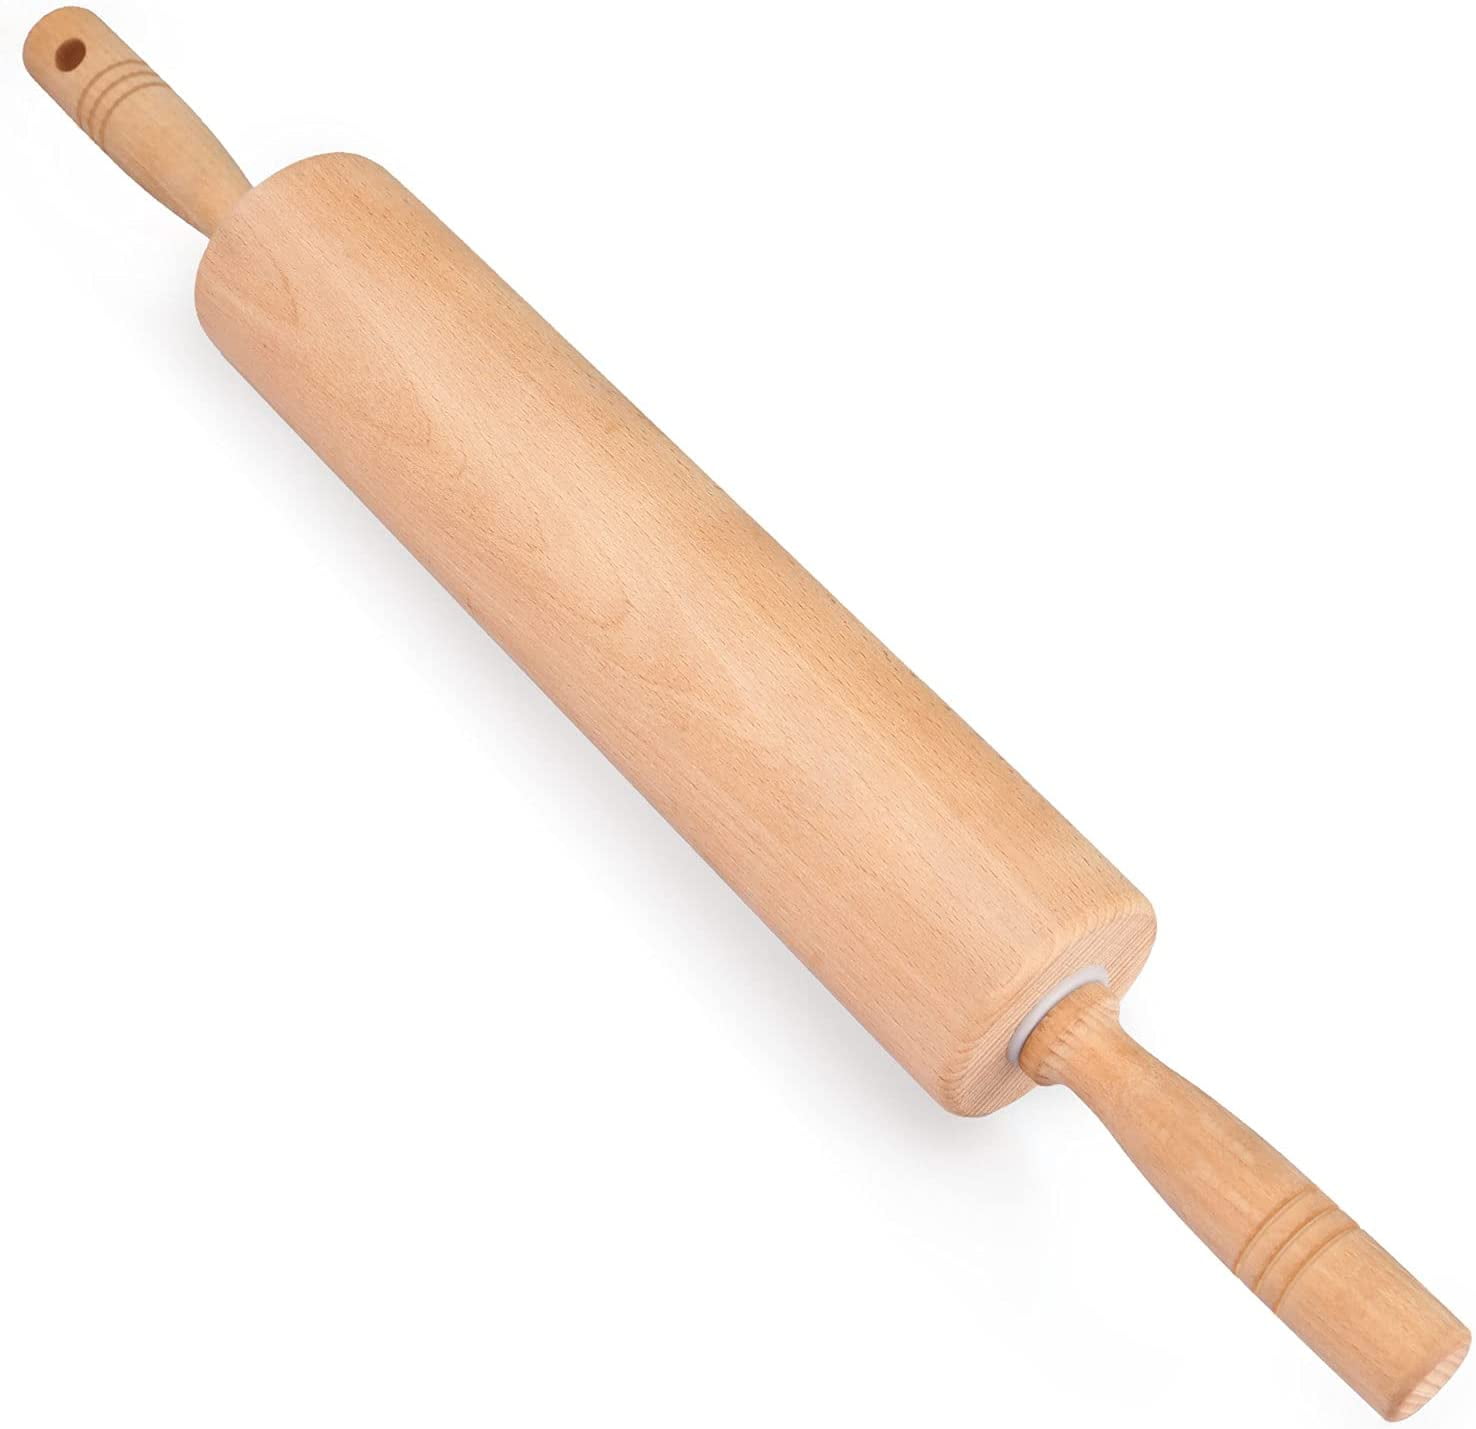 Ateco Professional Rolling Pin, -Inch Barrel, Made of Solid Rock 